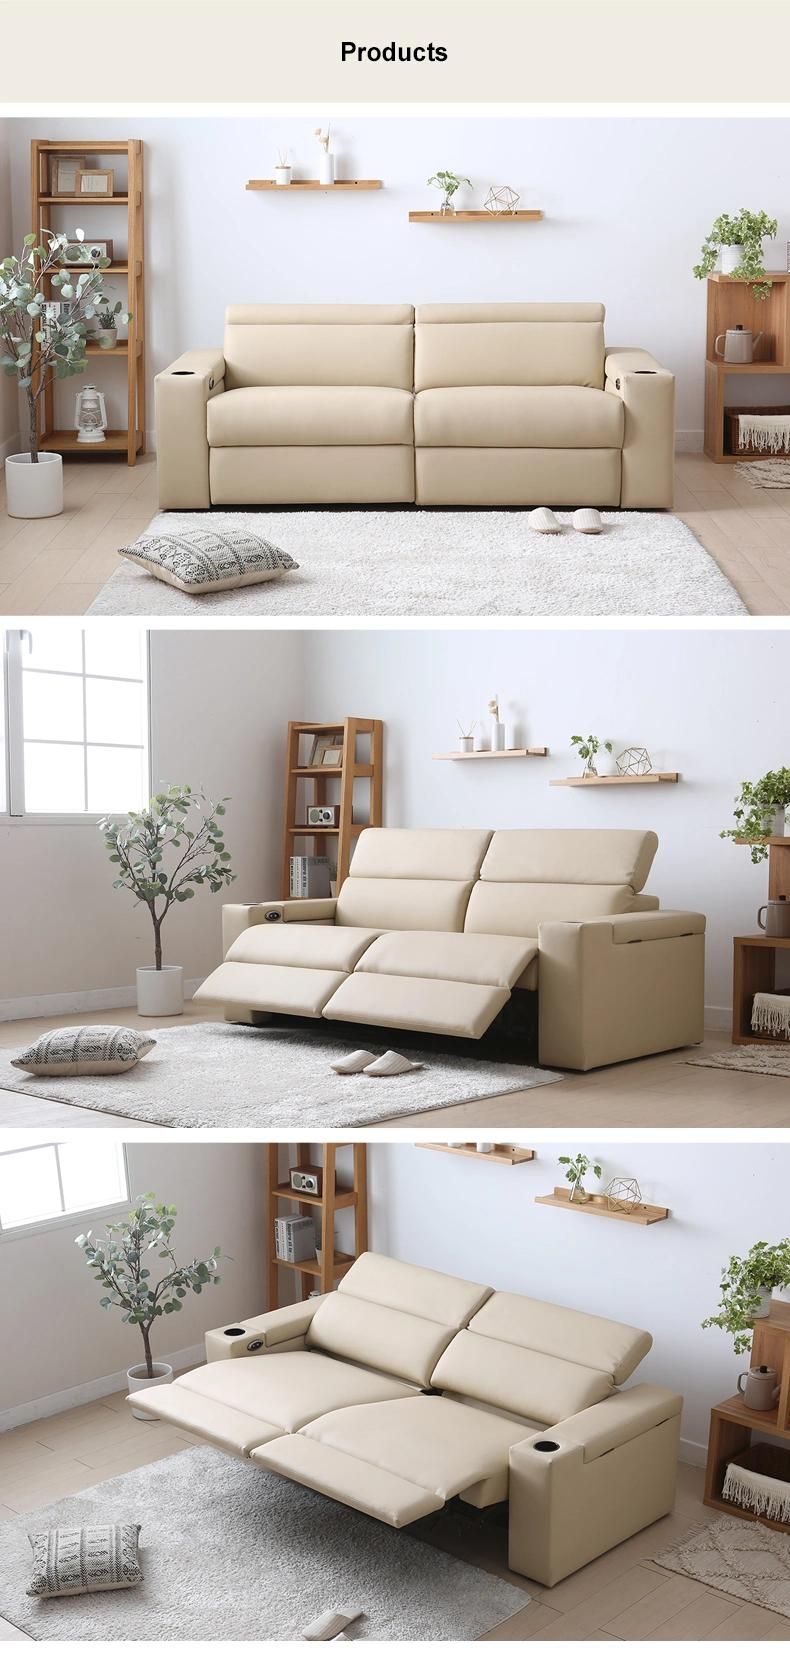 Fabric Non Inflatable Home Furniture Sets Modern Design Sofa with High Quality